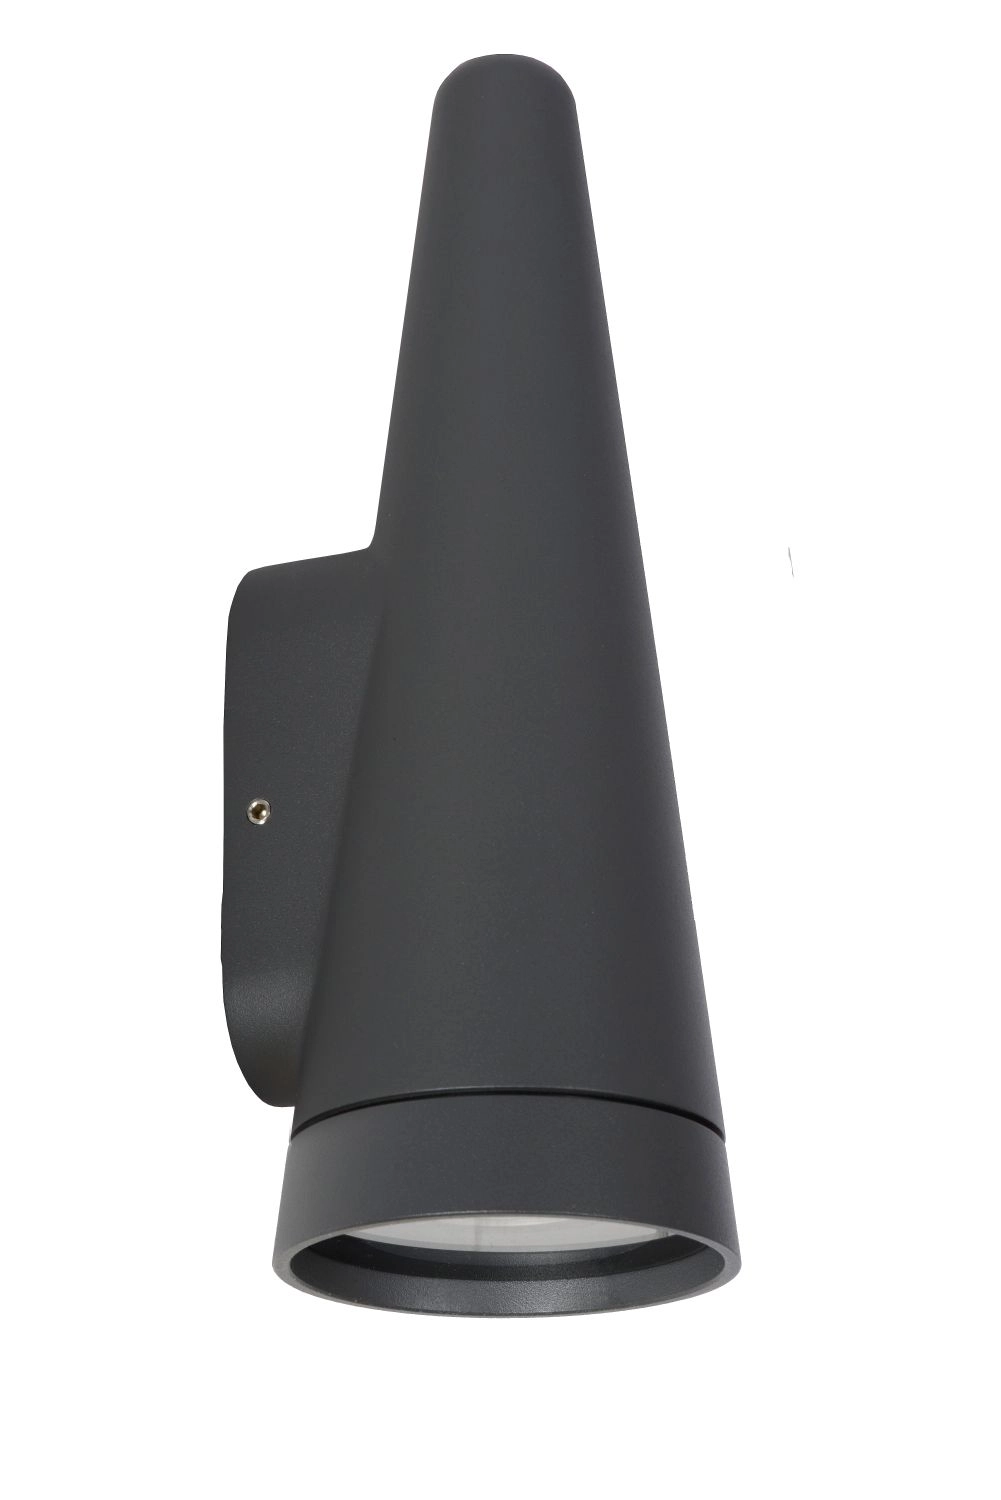 LU 27803/01/29 Lucide WIZARD - Wall light Outdoor - LED Dim. - 1xGU10 - IP54 - Anthracite